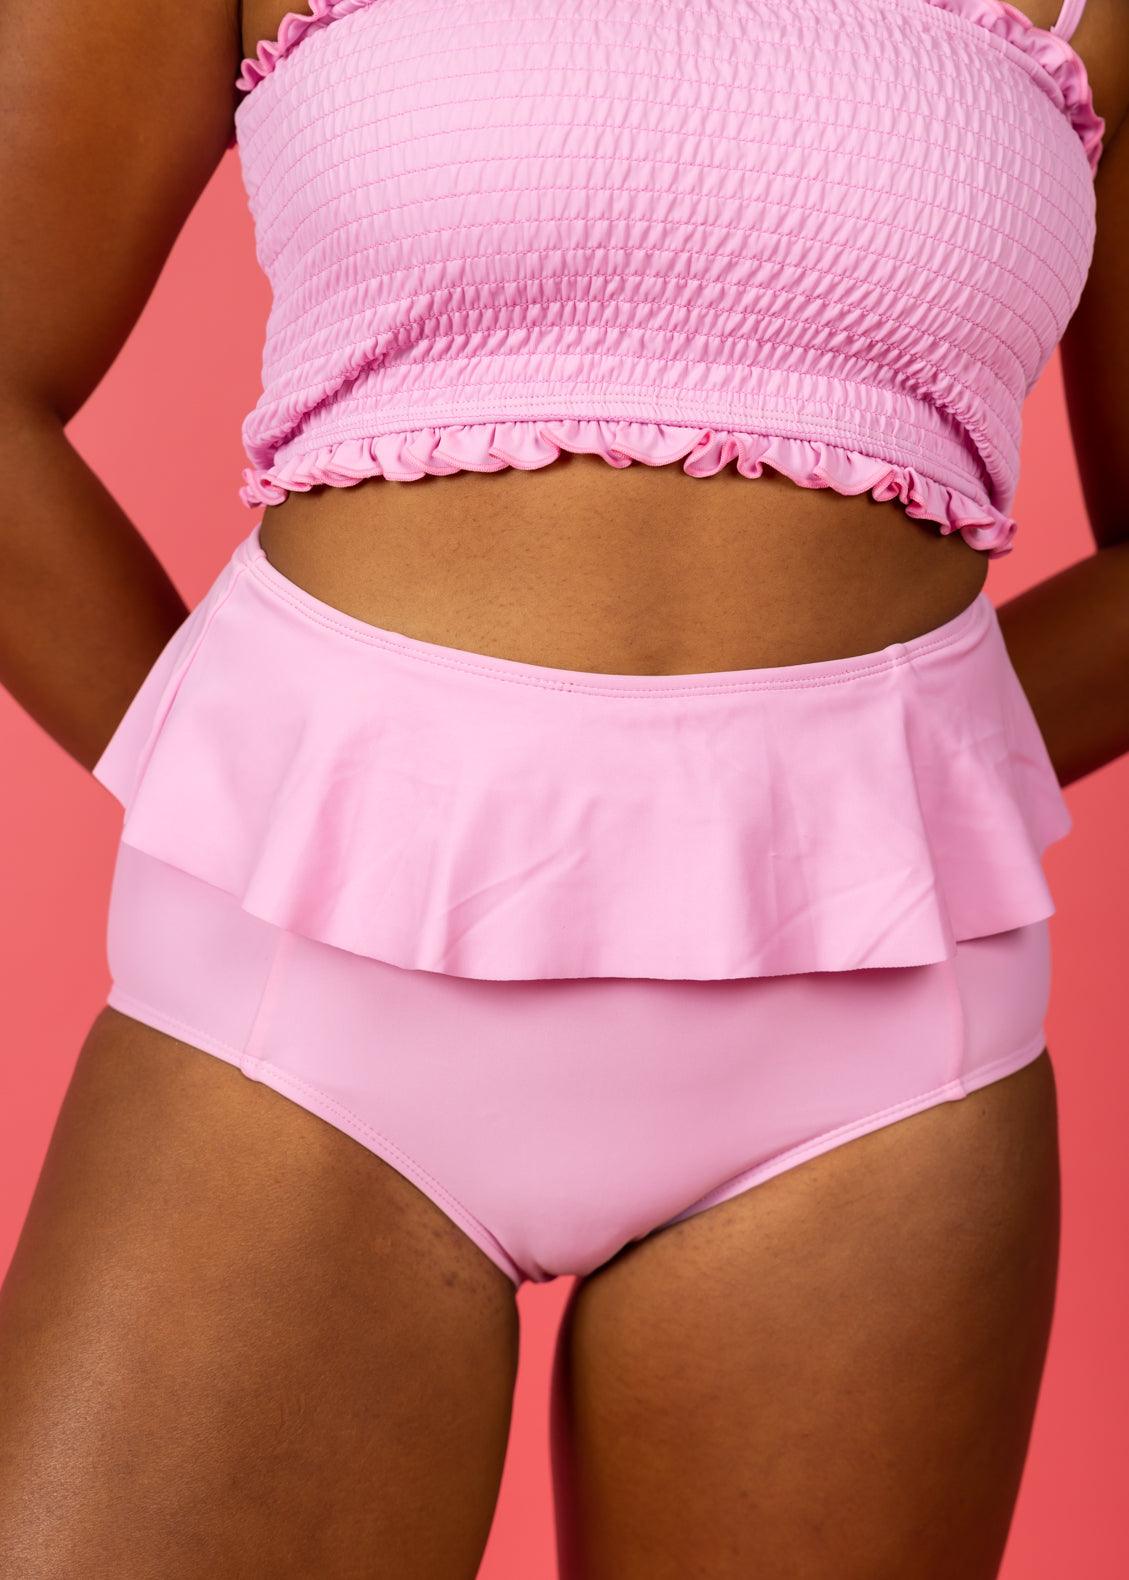 High-Waisted Swimsuit Bottom - Ultimate Pink